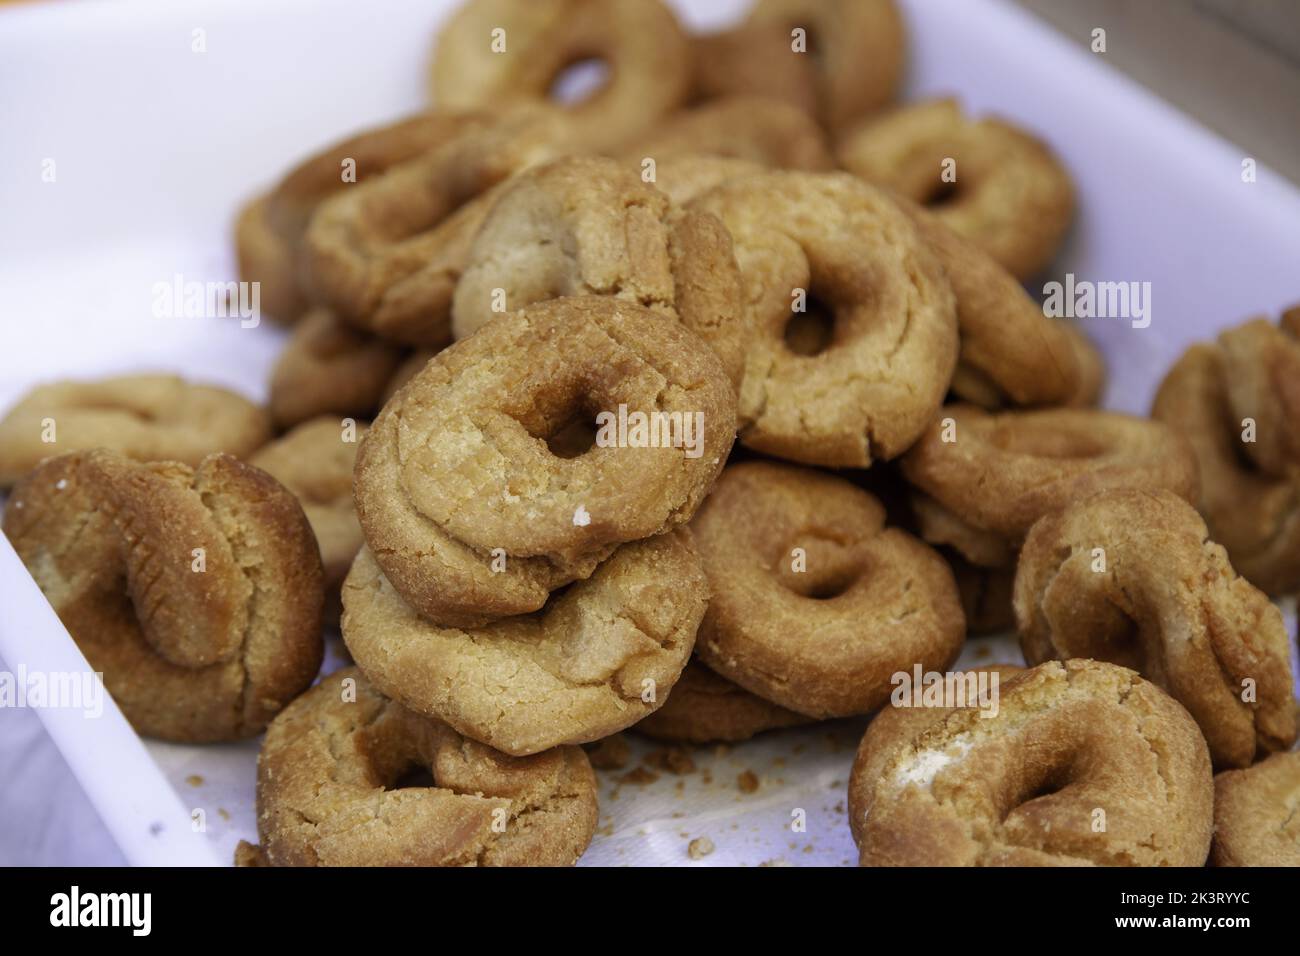 Artisan fried donuts in market food, alimentation Stock Photo